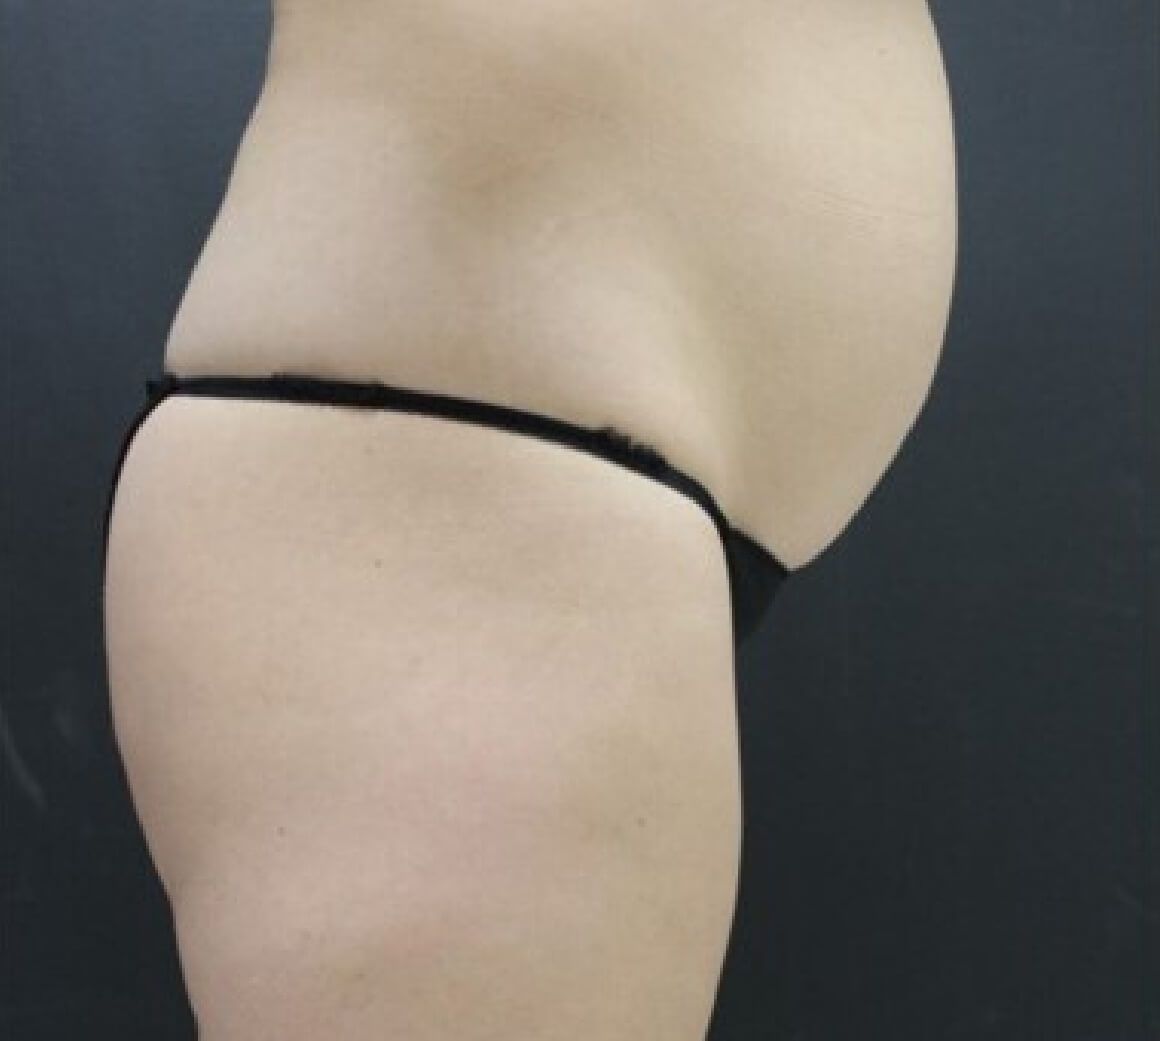 S6 Body Sculpting Treatment: How Does Bio-laser with Vacuum Suction Induce  Fat Reduction? ｜New Beauty SG